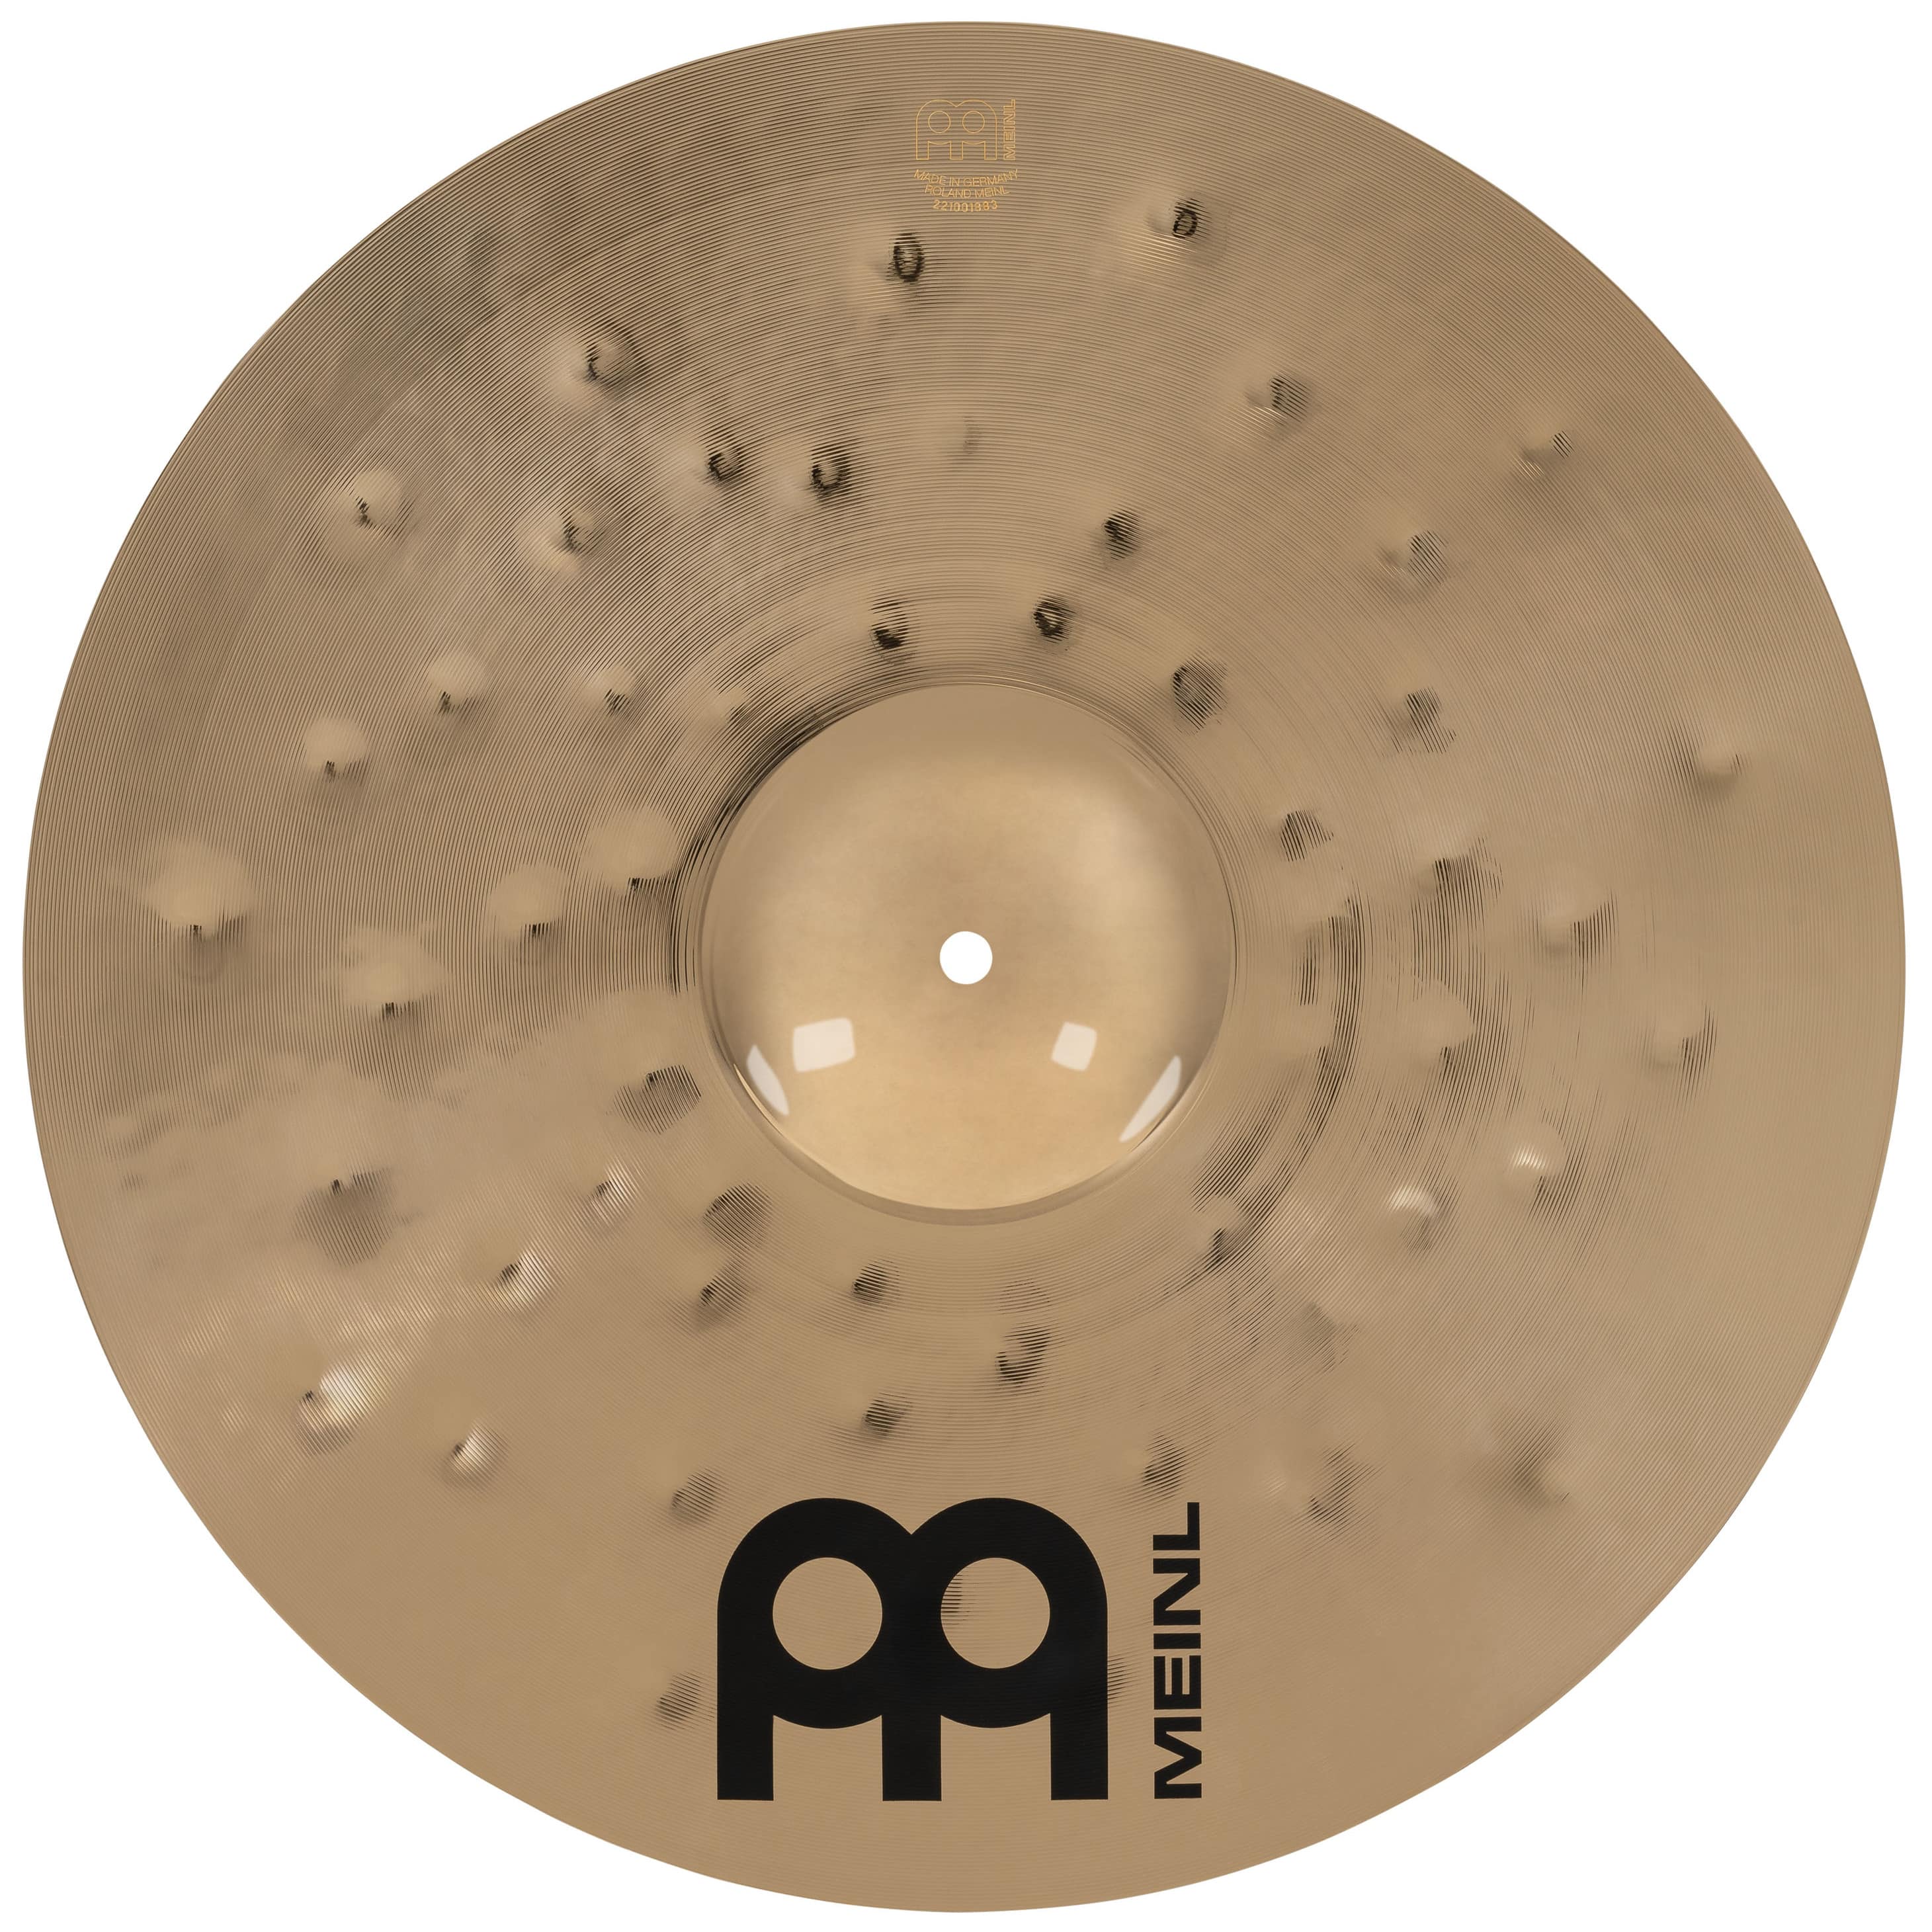 Meinl Cymbals PAC18ETHC - 18" Pure Alloy Custom Extra Thin Hammered Crash 1